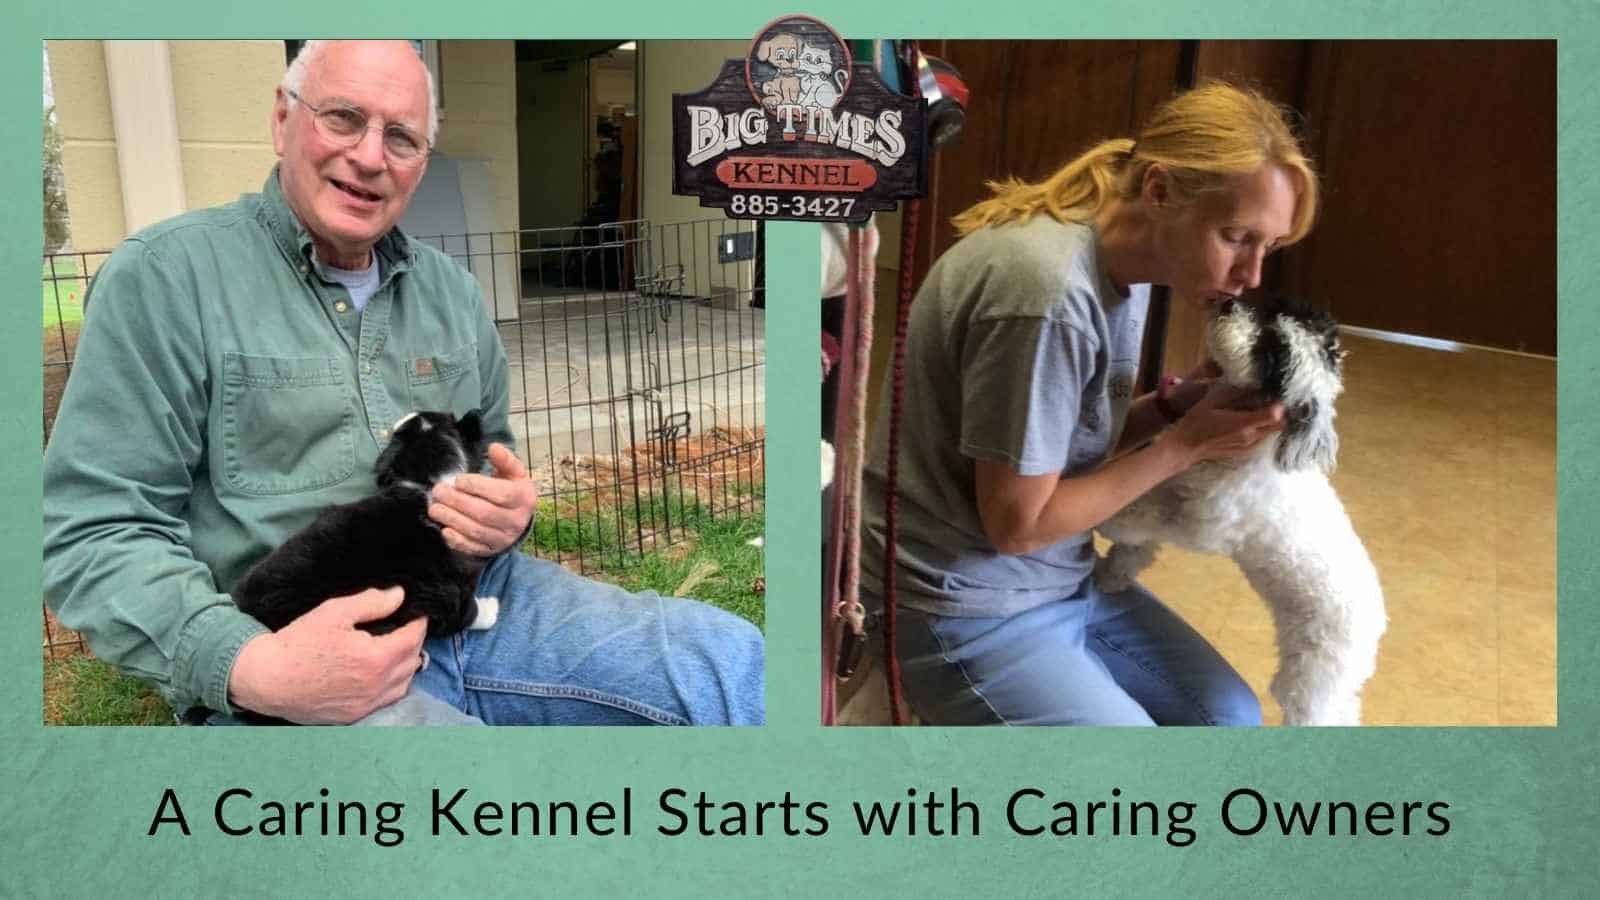 A Caring Kennel Starts with Caring Owners – Big Times Kennel